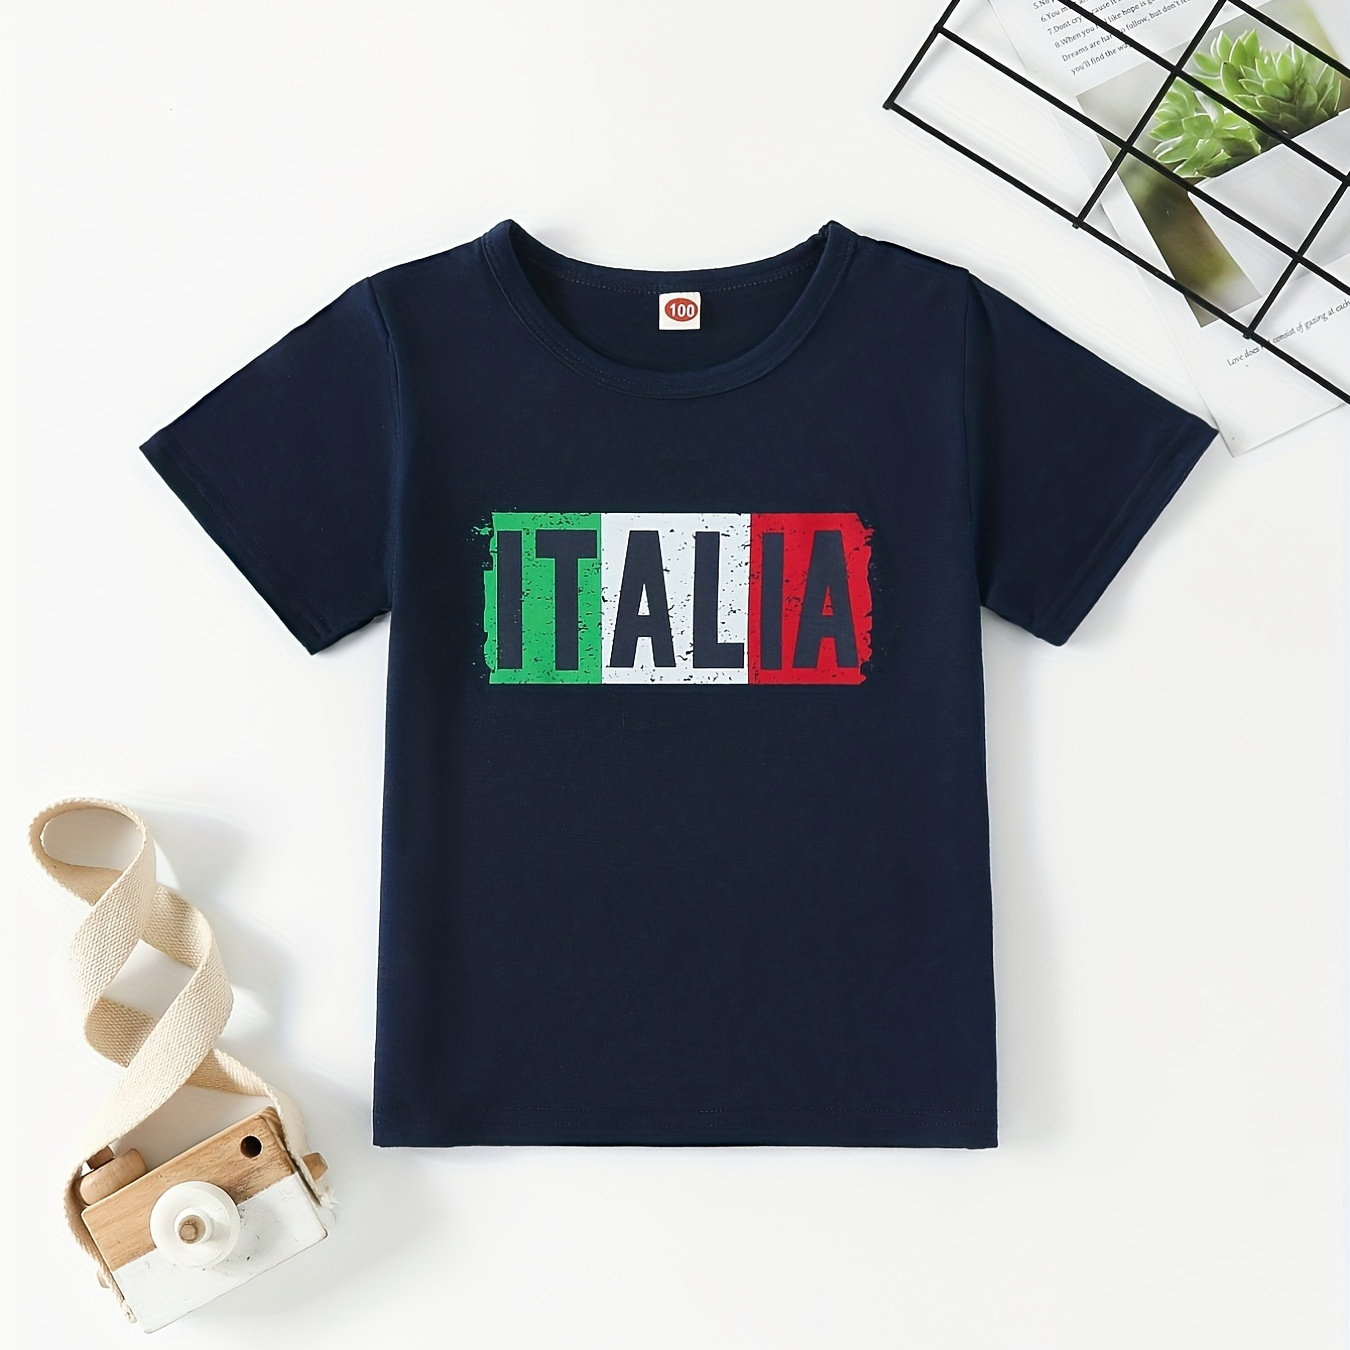 

Boys Shirt Flag ''italia'' Graphic Short Sleeve T-shirt Tops Kids Casual Tees For Vacation Outfit Clothes